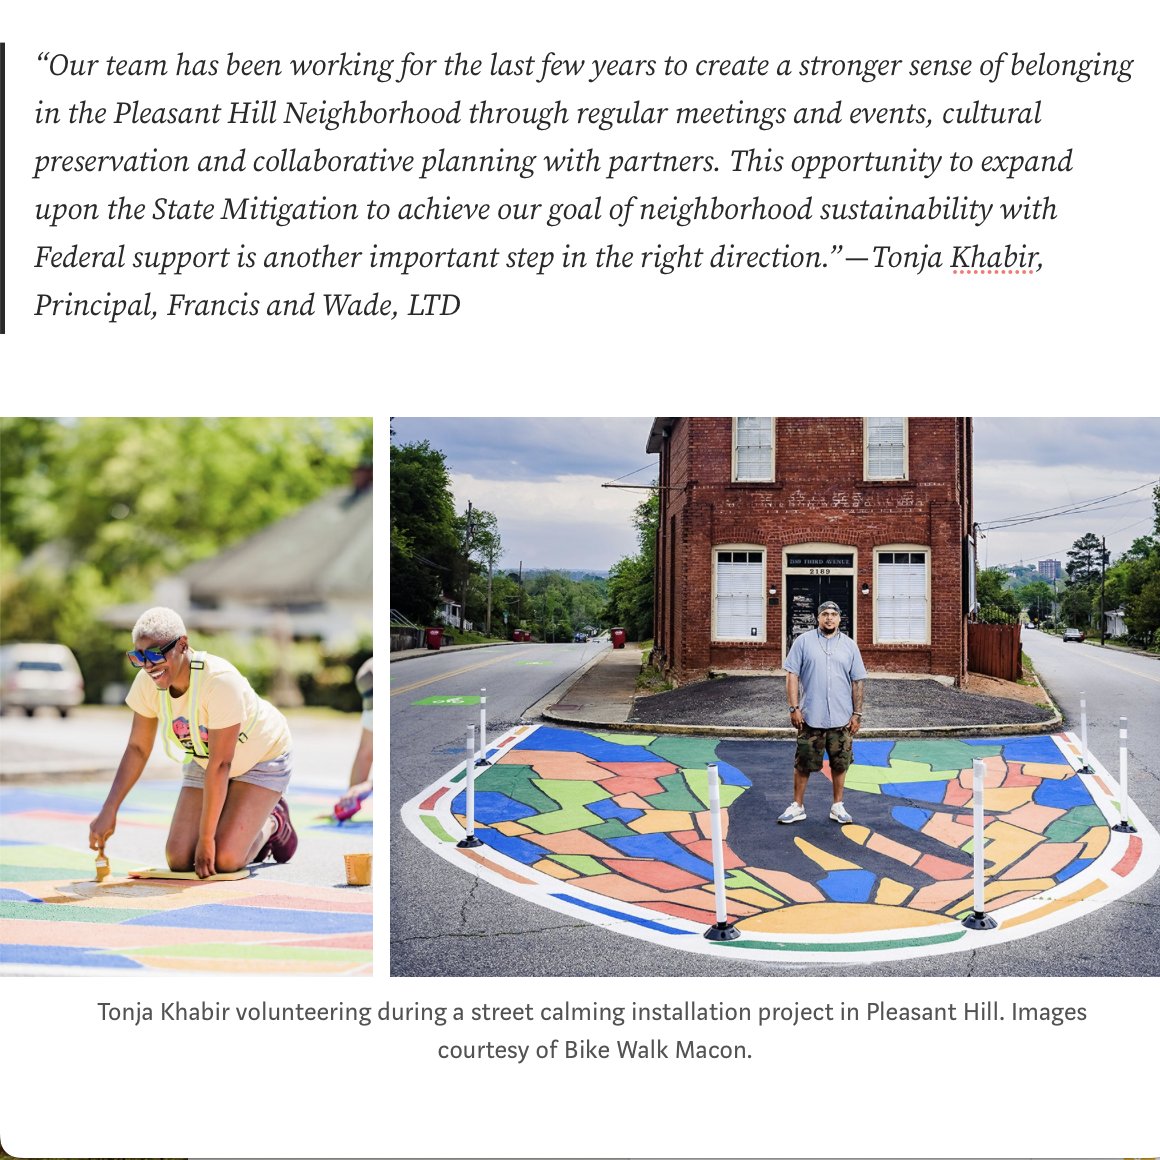 Check out how #Macon, #Georgia is putting its @USDOT Reconnecting Communities grant to work for Pleasant Hill. @MaconBibbCounty @bikewalkmacon @newtownmacon @CFCGA @knightmacon @knightfdn @TheJPBFdn @kresgefdn @WilliamPennFdn #civicinfrastructure #funding medium.com/reimagining-th…